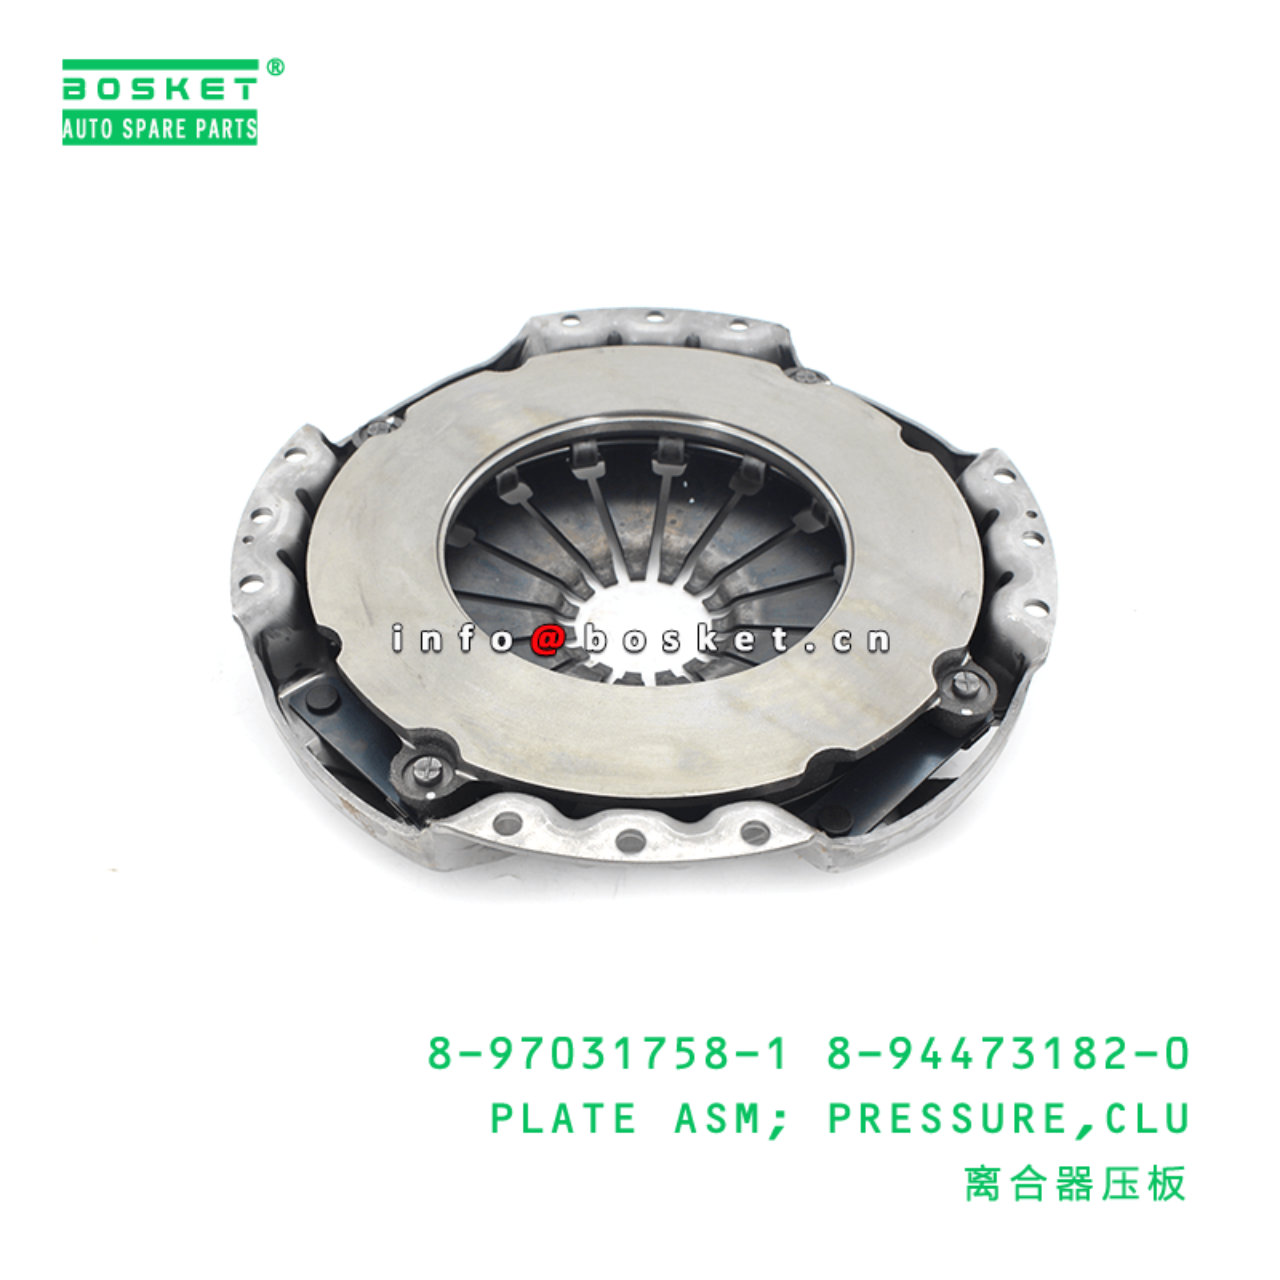 8-97031758-1 8-94473182-0 Clutch Pressure Plate Assembly 8970317581 8944731820 Suitable for ISUZU NP